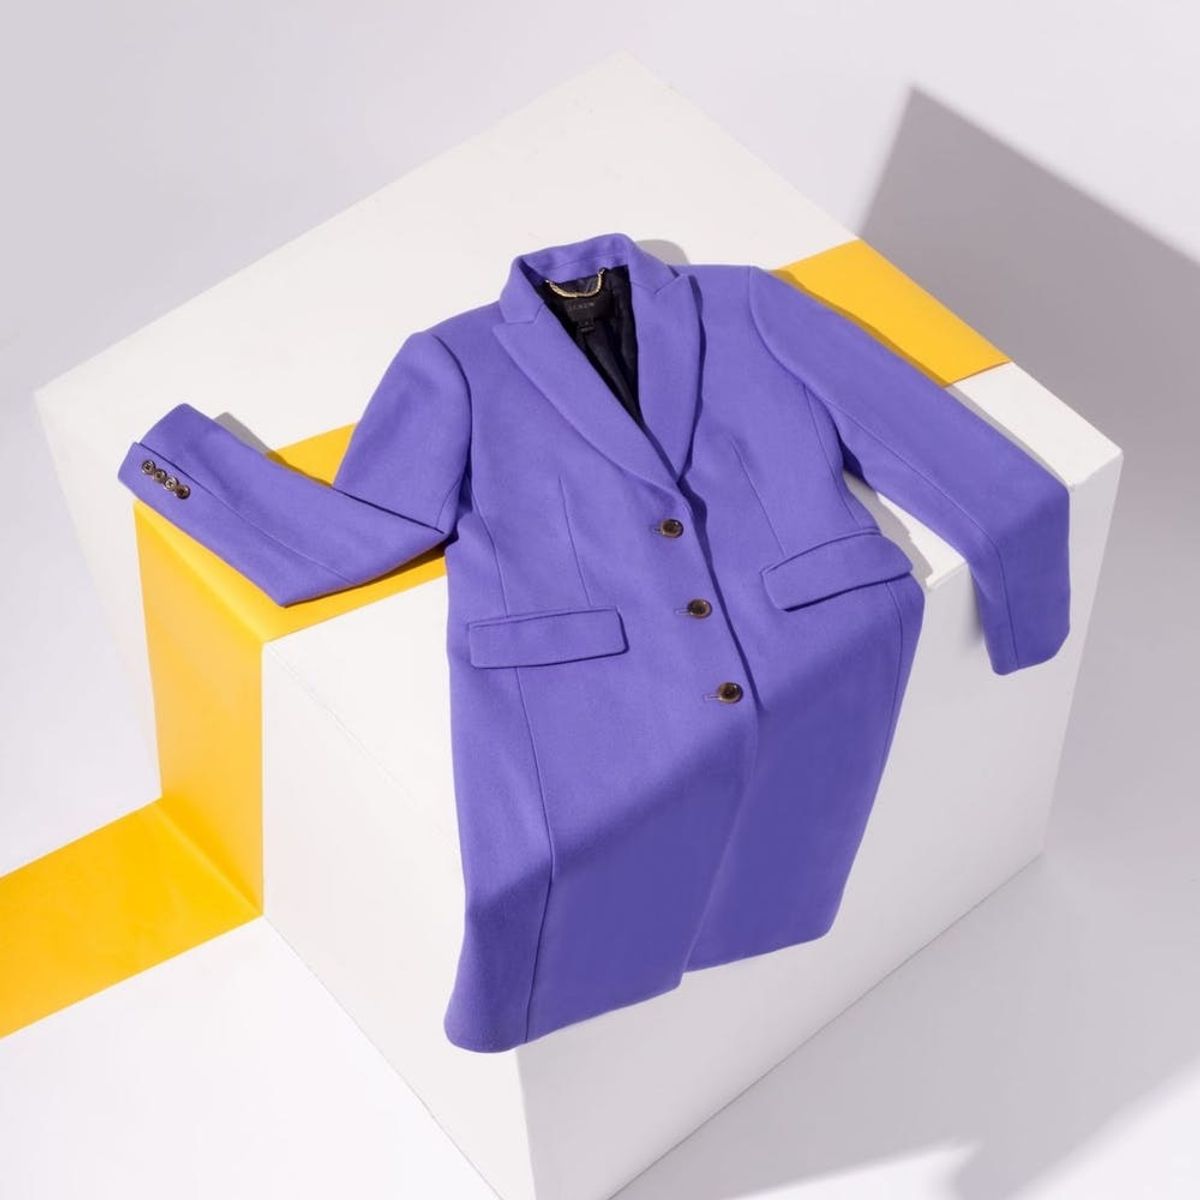 J.Crew’s Newest Colorful Coat Is the Answer to Winter Wardrobe Boredom